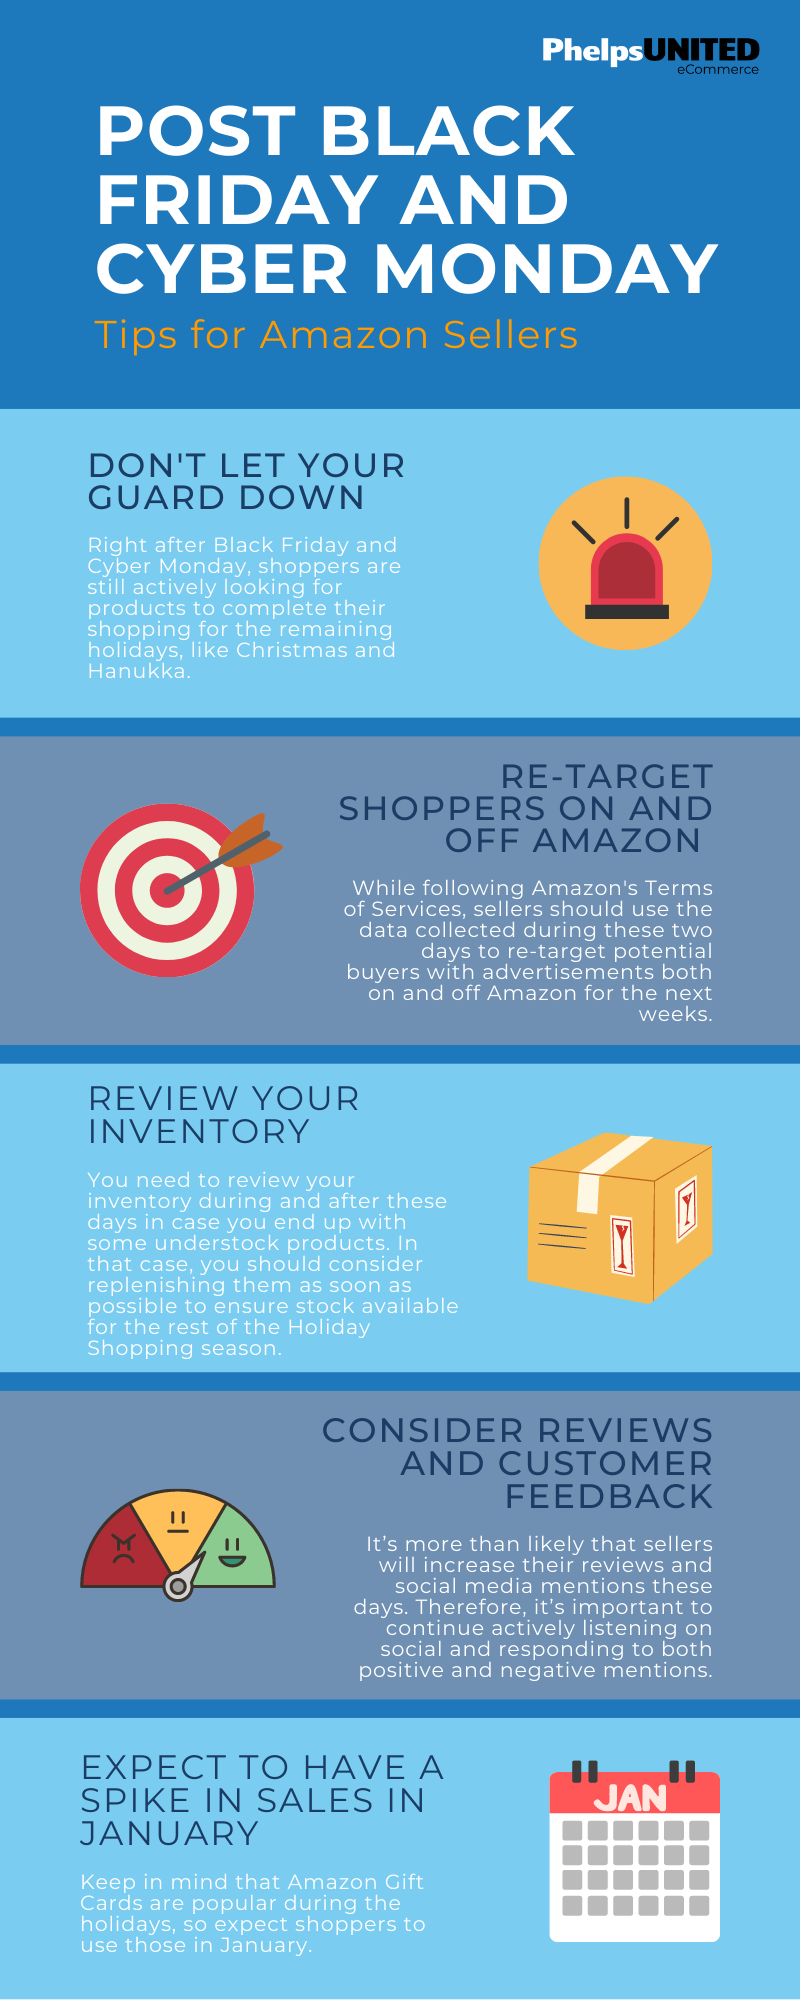 5 quick tips for Amazon Sellers Post Black Friday and Cyber Monday Infographic